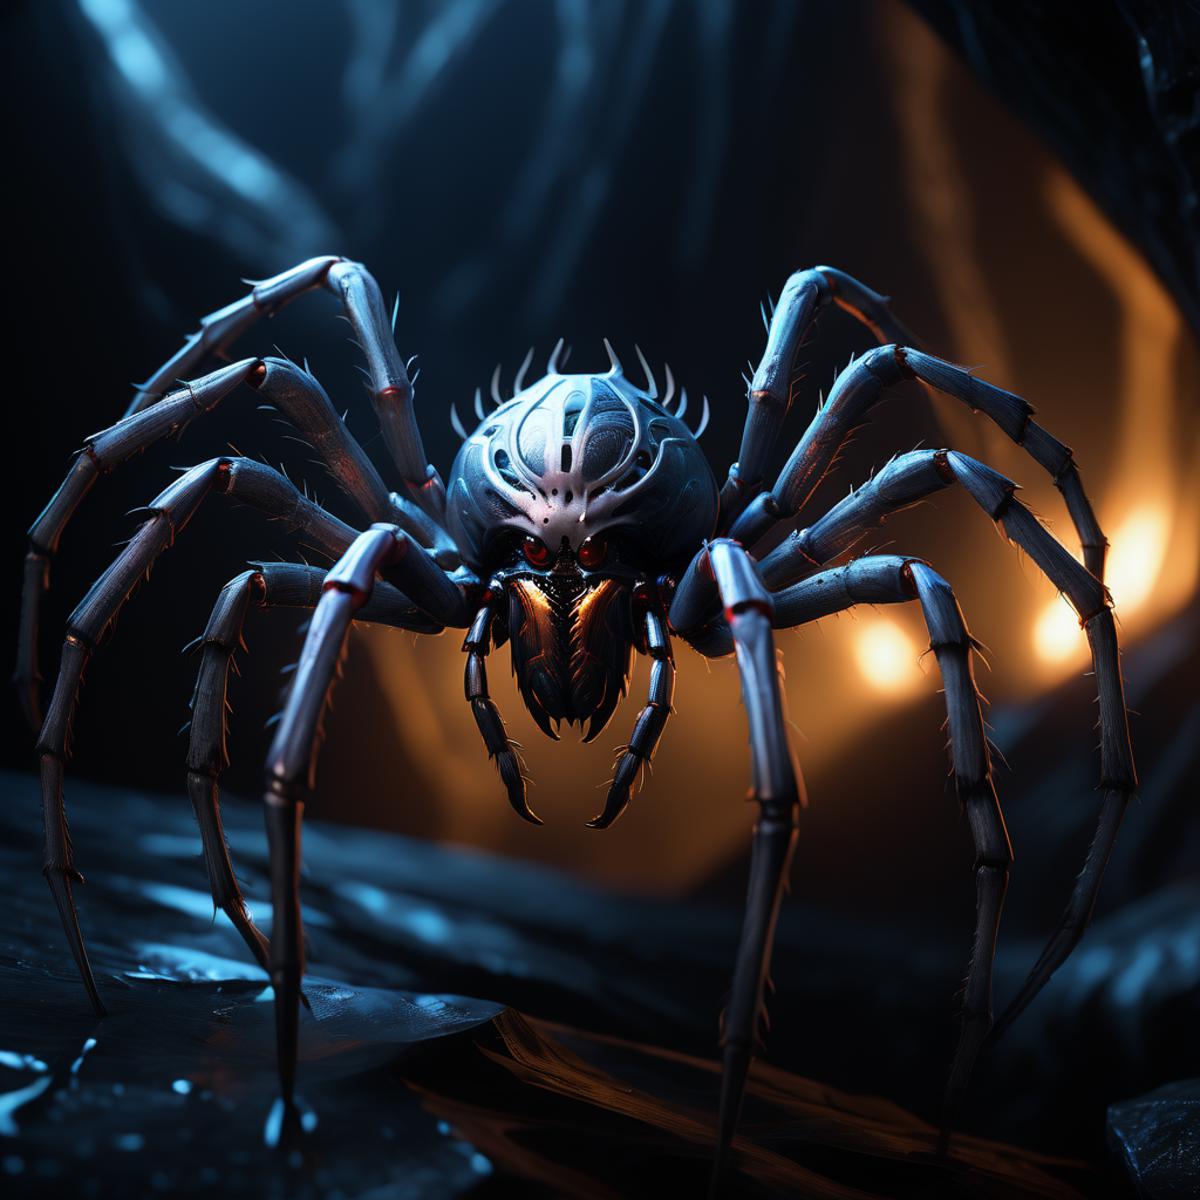 RPGPhaseSpiderXL image by ashrpg